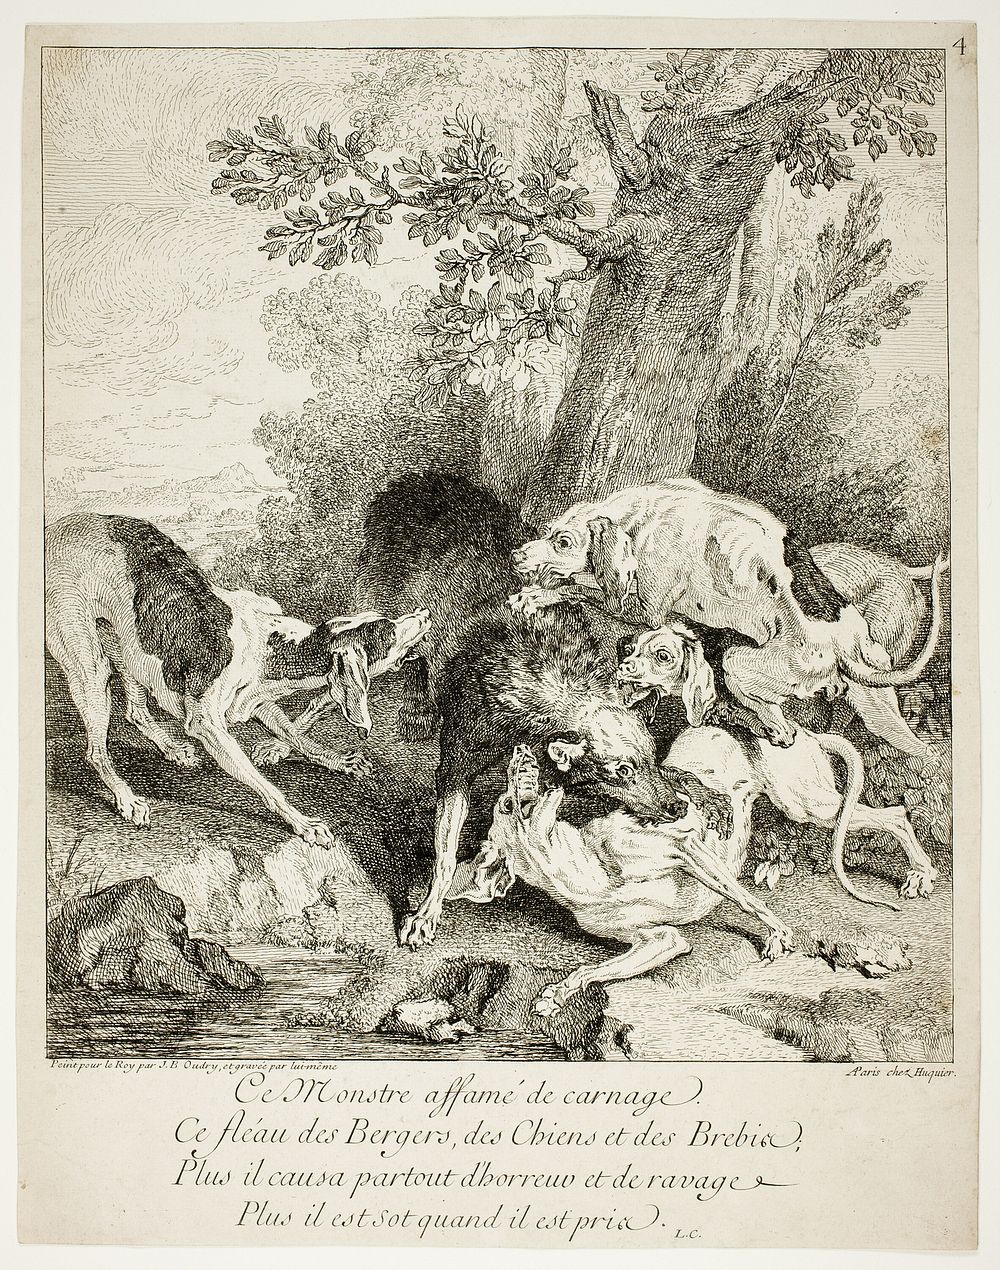 The Wolf at Bay by Jean-Baptiste Oudry